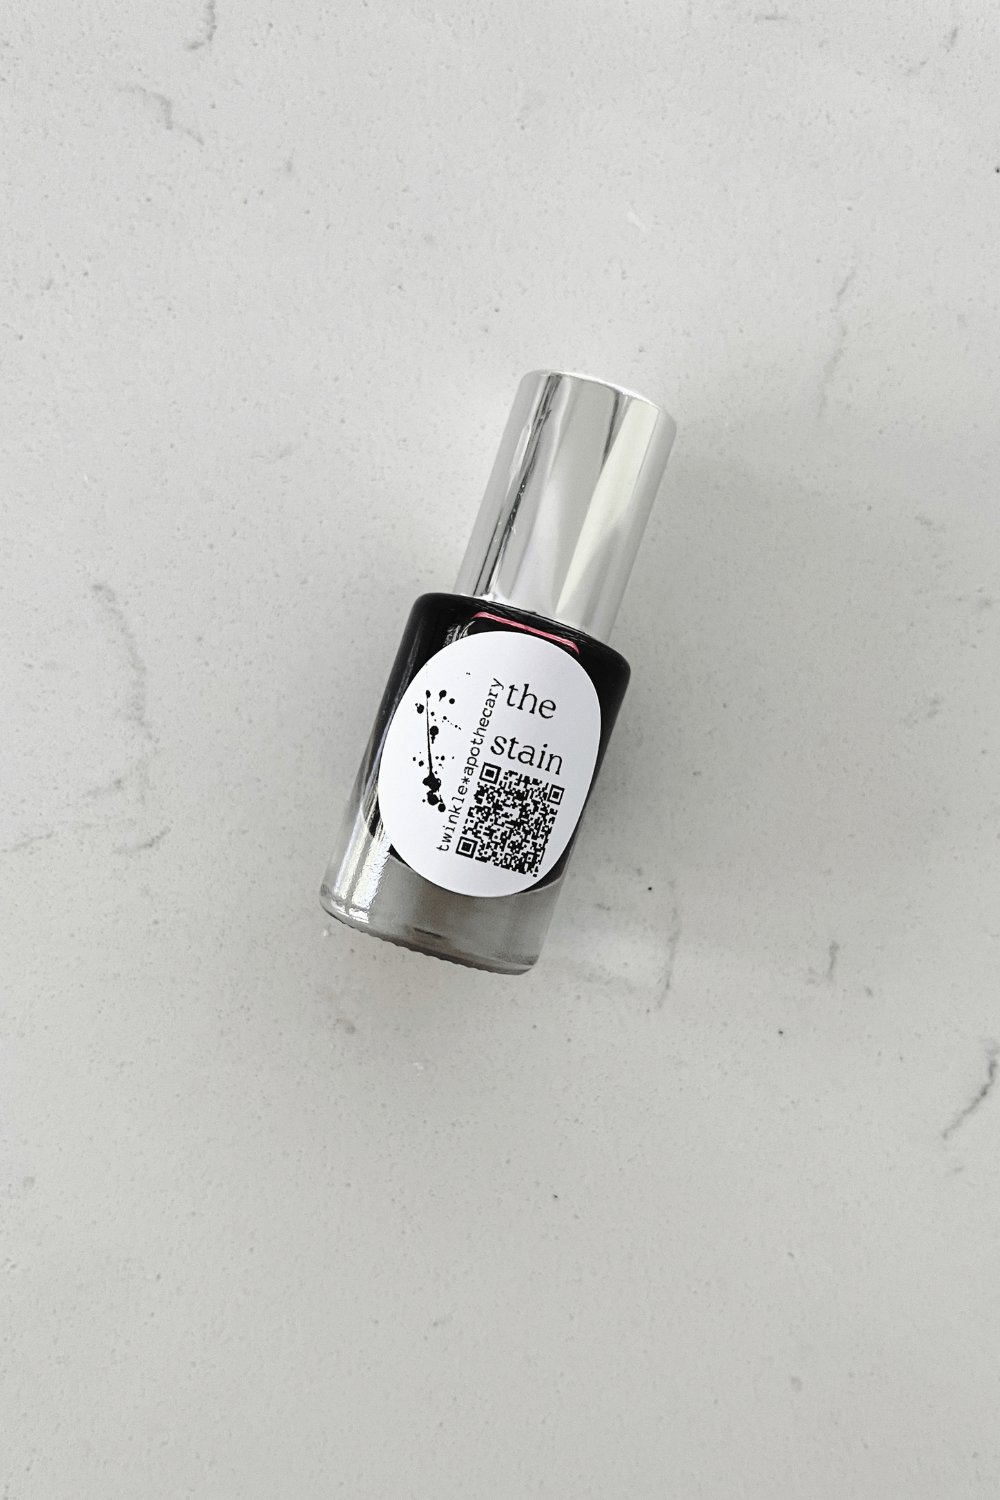 the stain roll on natural vegan lip and cheek tint makeup by twinkle apothecary 